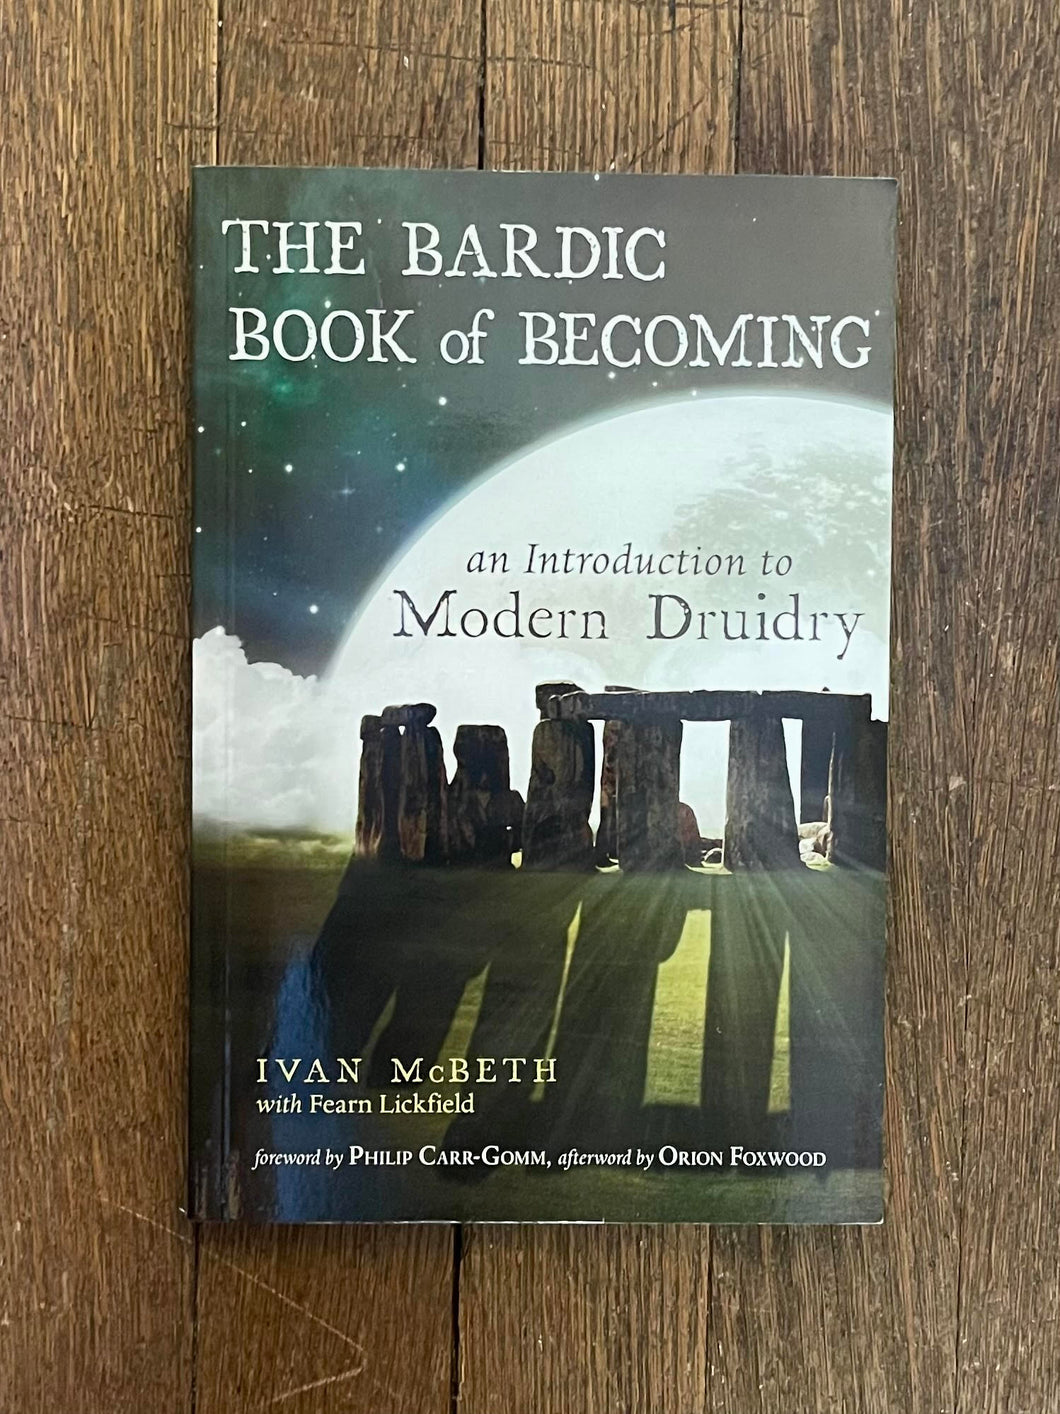 The Bardic Book of Becoming: an Introduction to Modern Druidry by Ivan McBeth